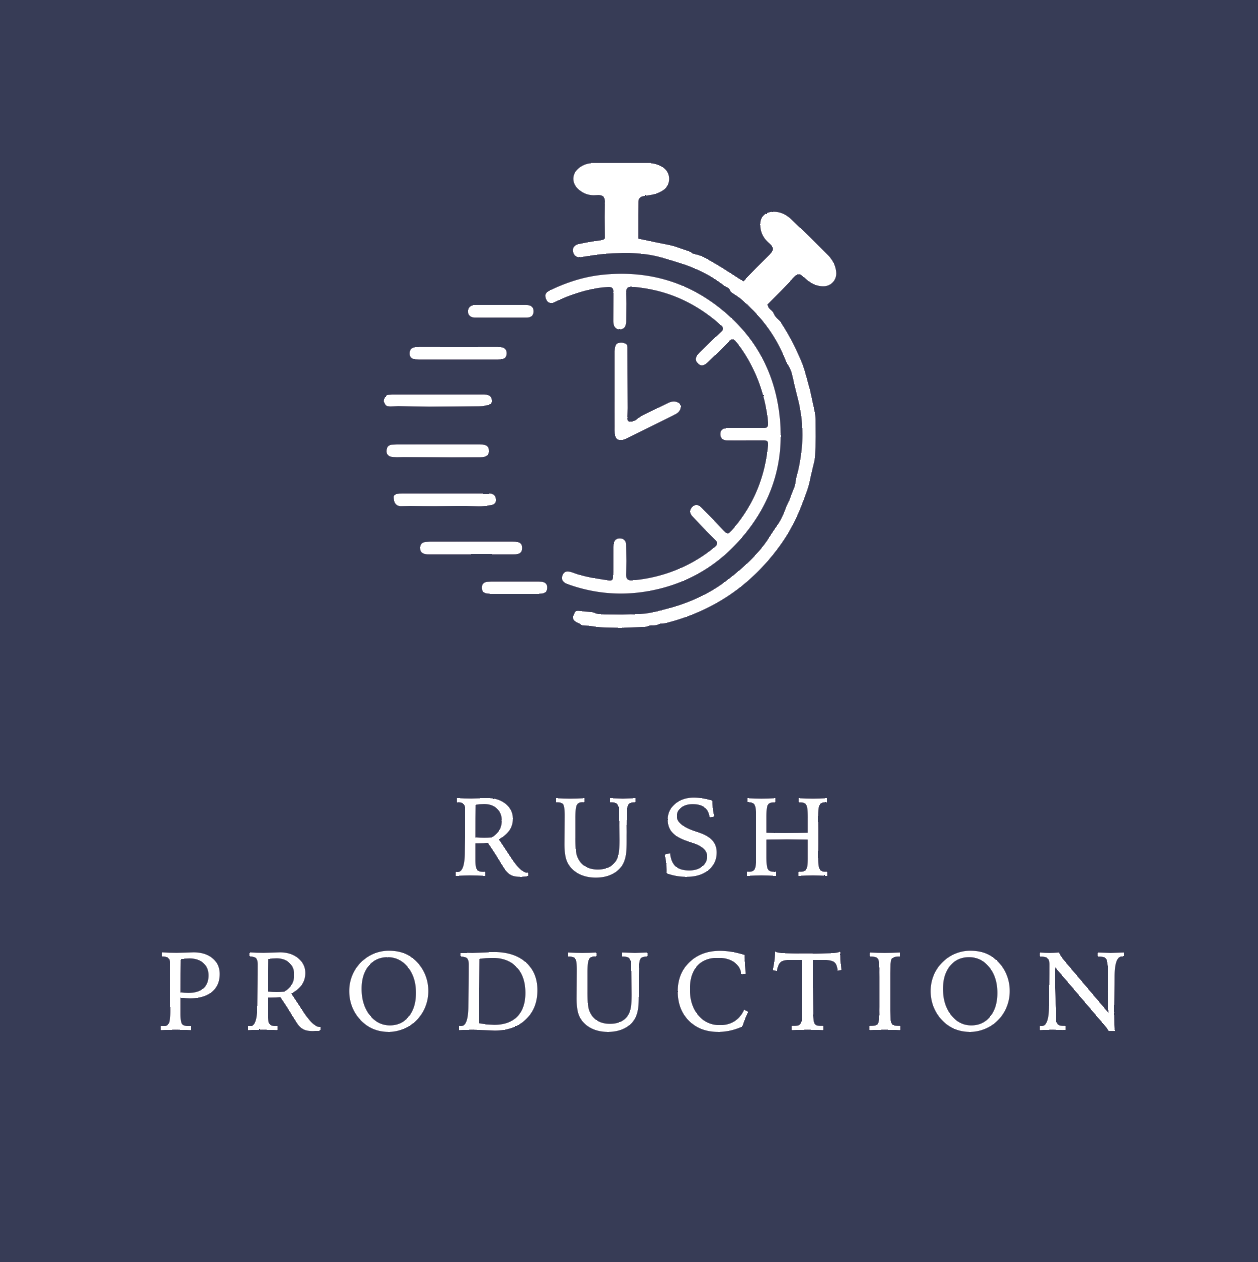 Rush Processing (24 business hours) - Barn Street Designs